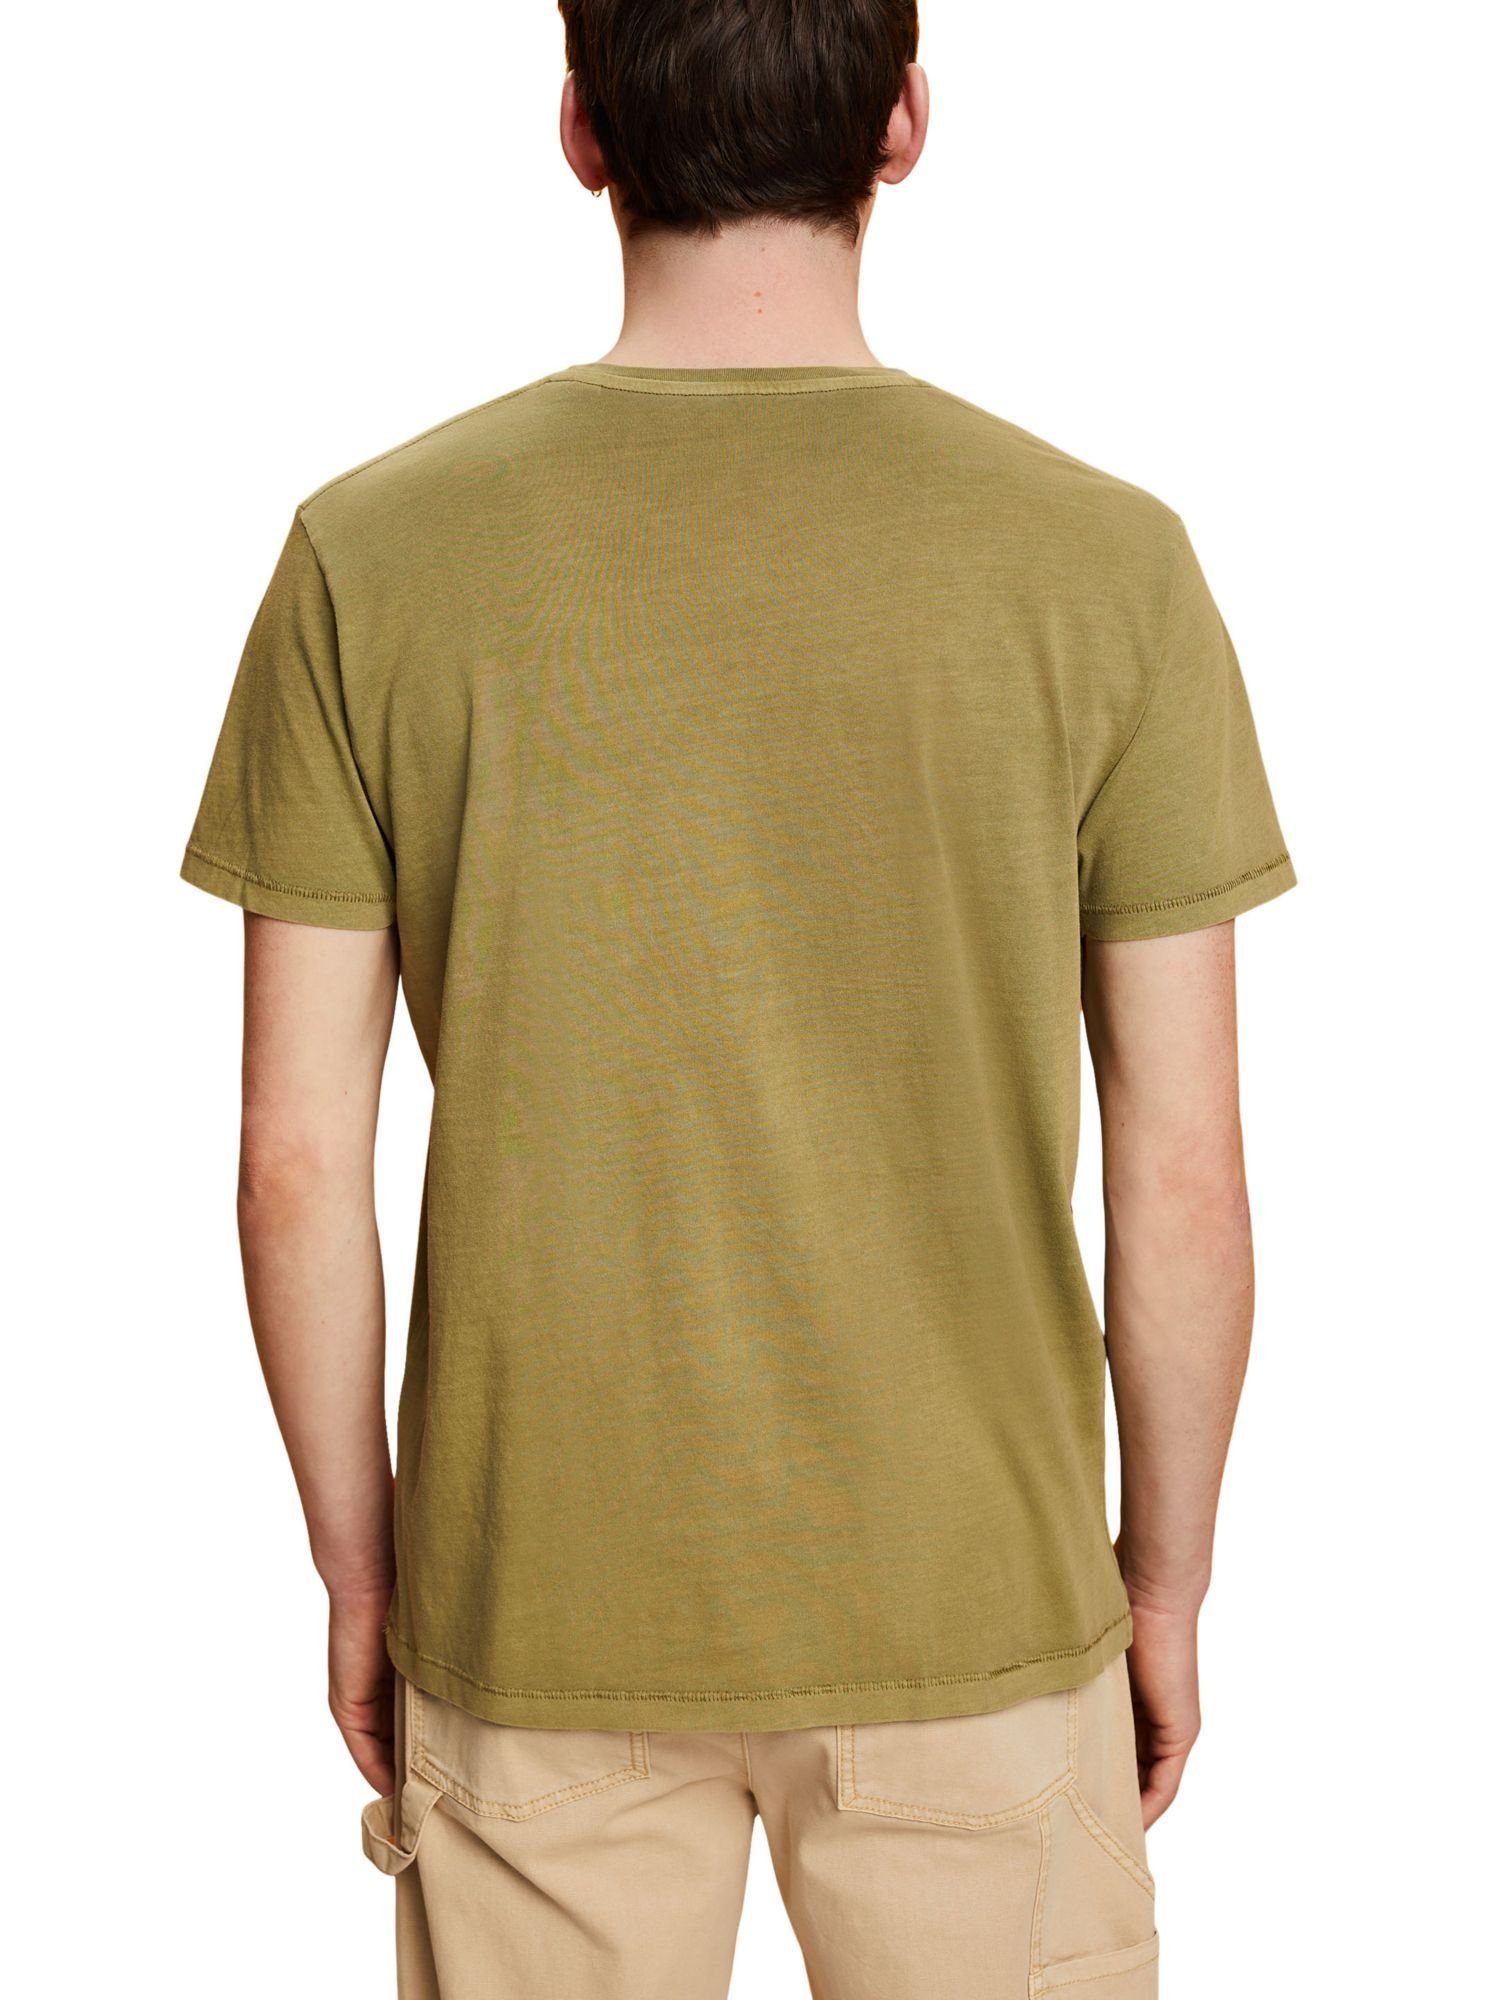 edc OLIVE 100 % by T-Shirt T-Shirt (1-tlg) Baumwolle Washed-Look, Esprit im